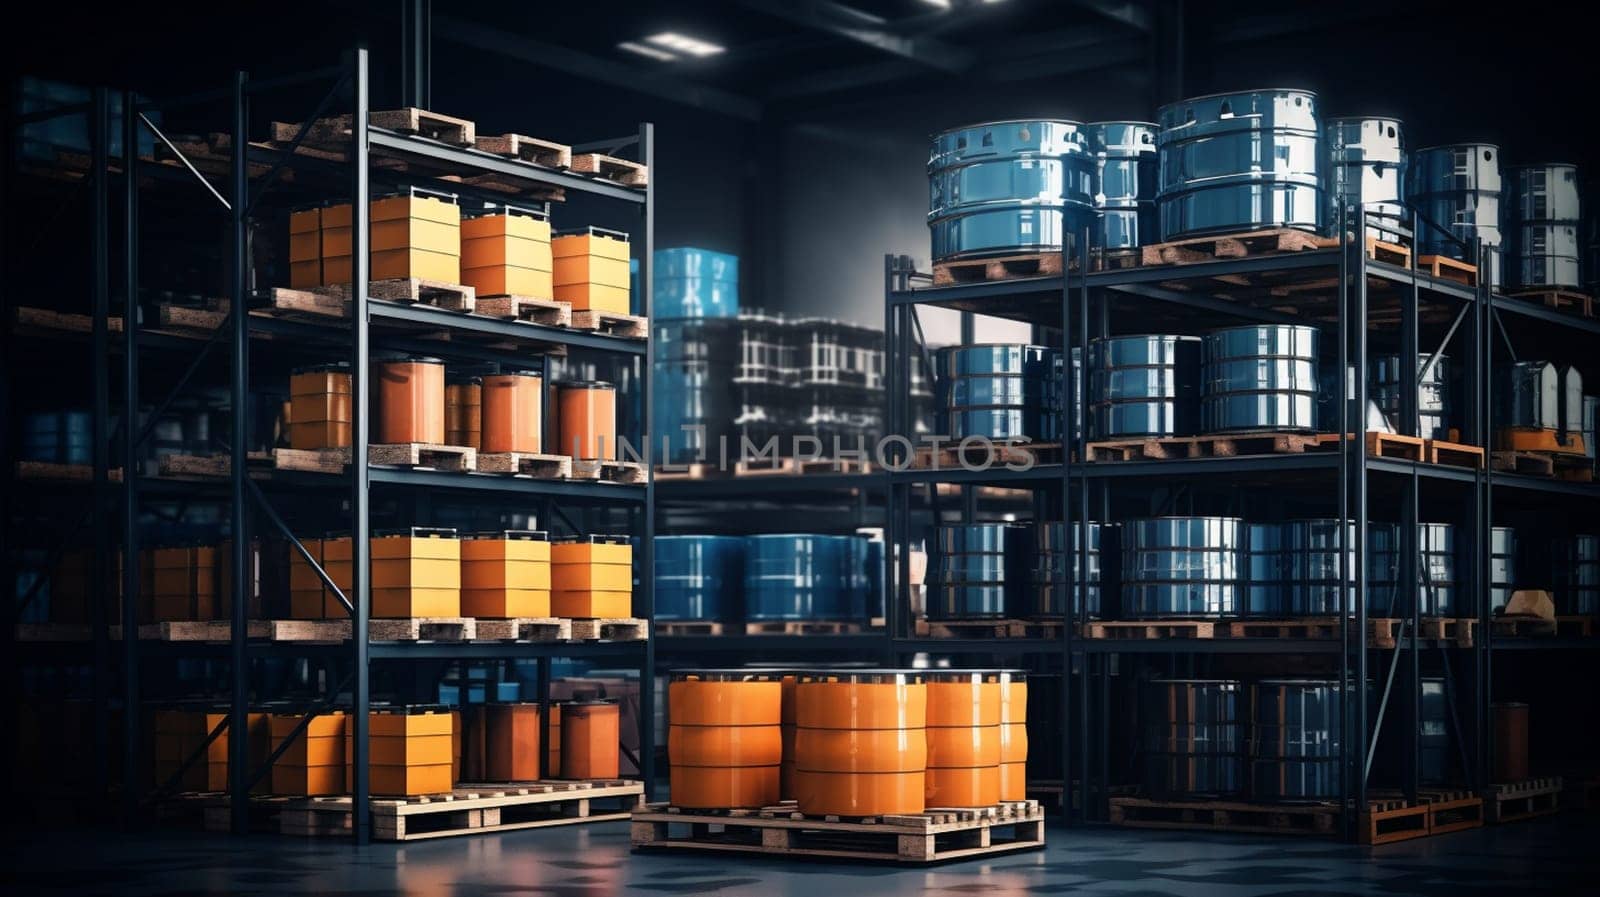 barrels in the warehouse, Storage stock, Chemical warehouse. 3D illustration by Andelov13